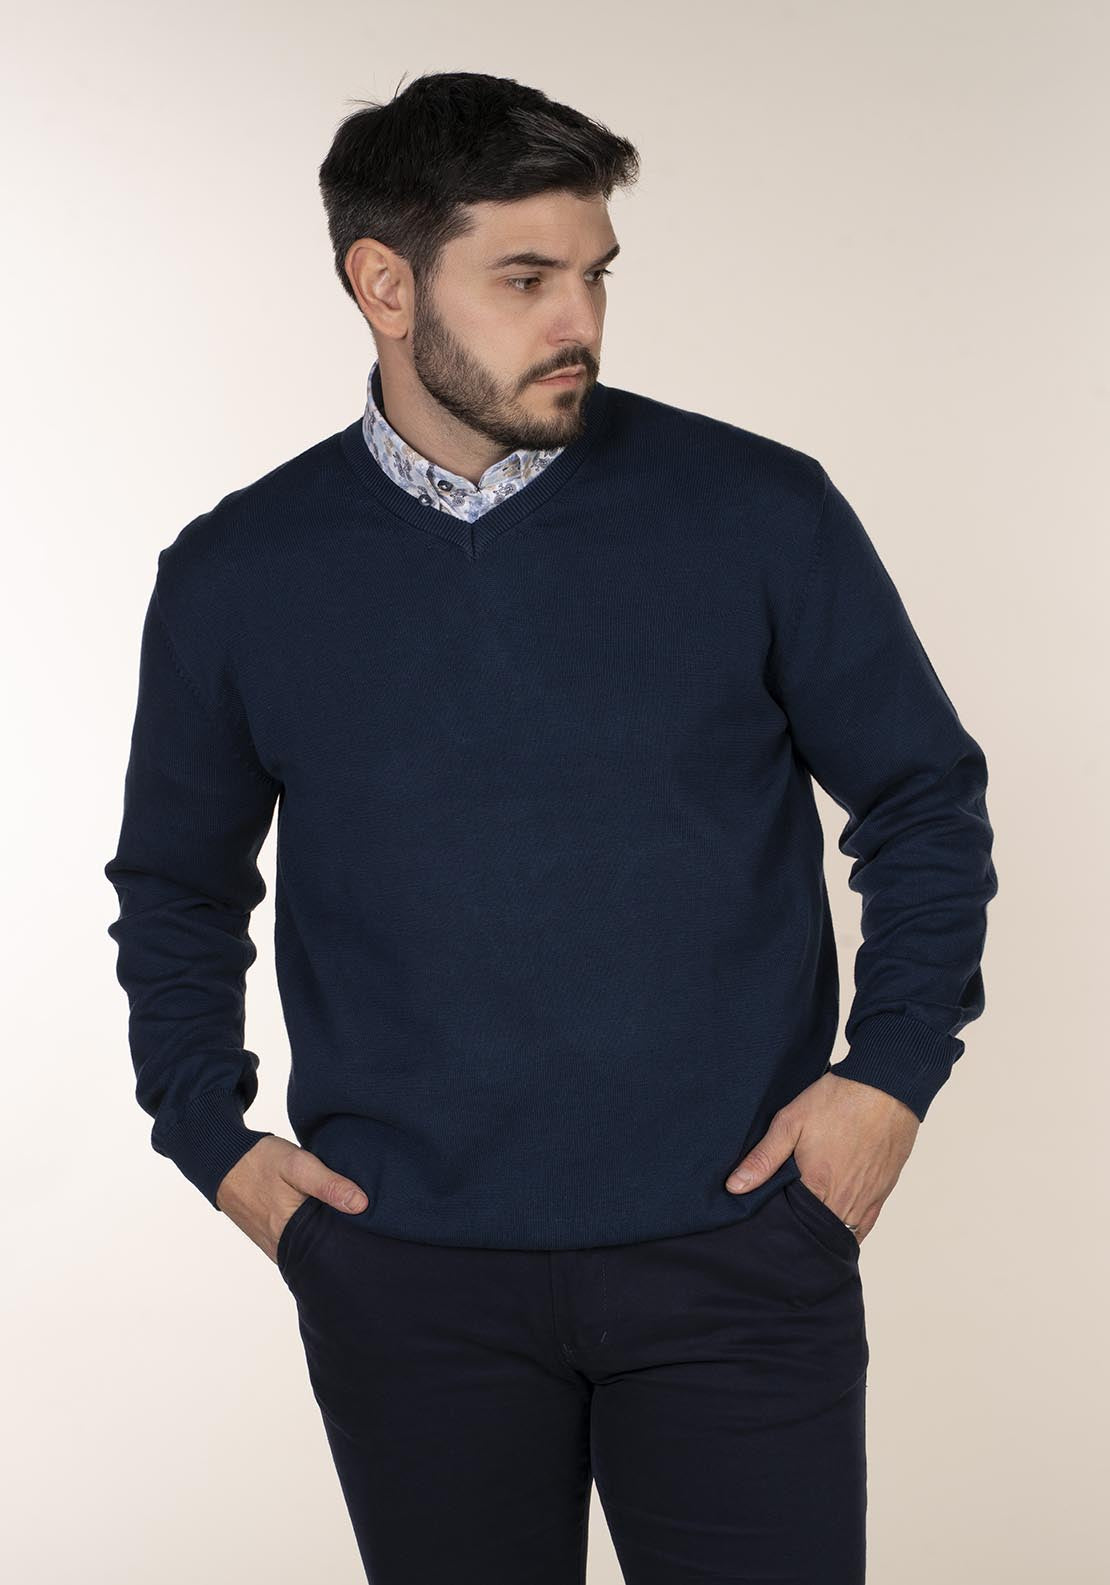 Yeats Plain Cotton V Neck Sweaters - Blue 2 Shaws Department Stores